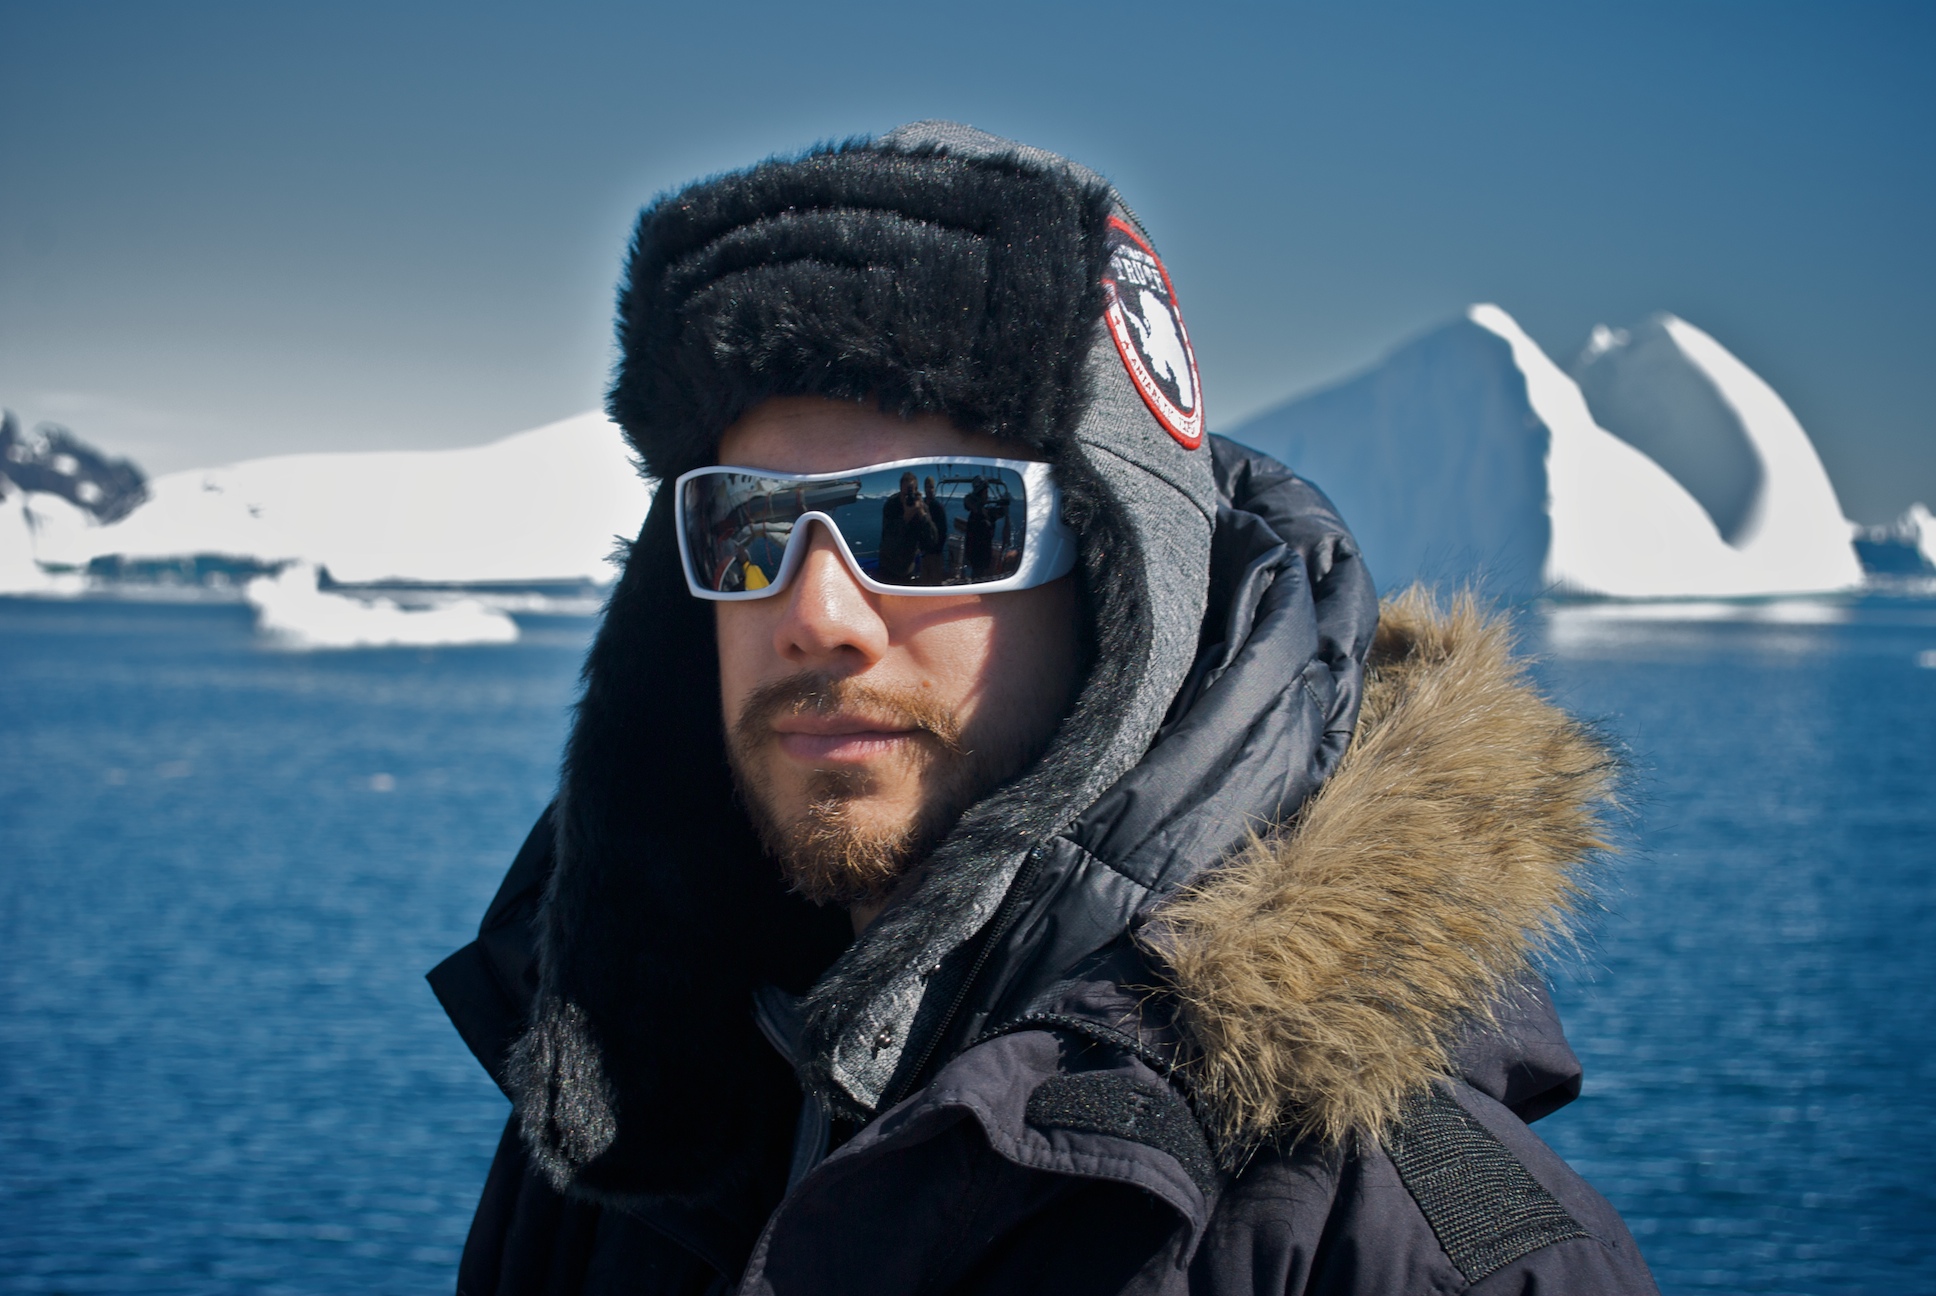 On set in Antarctica for 